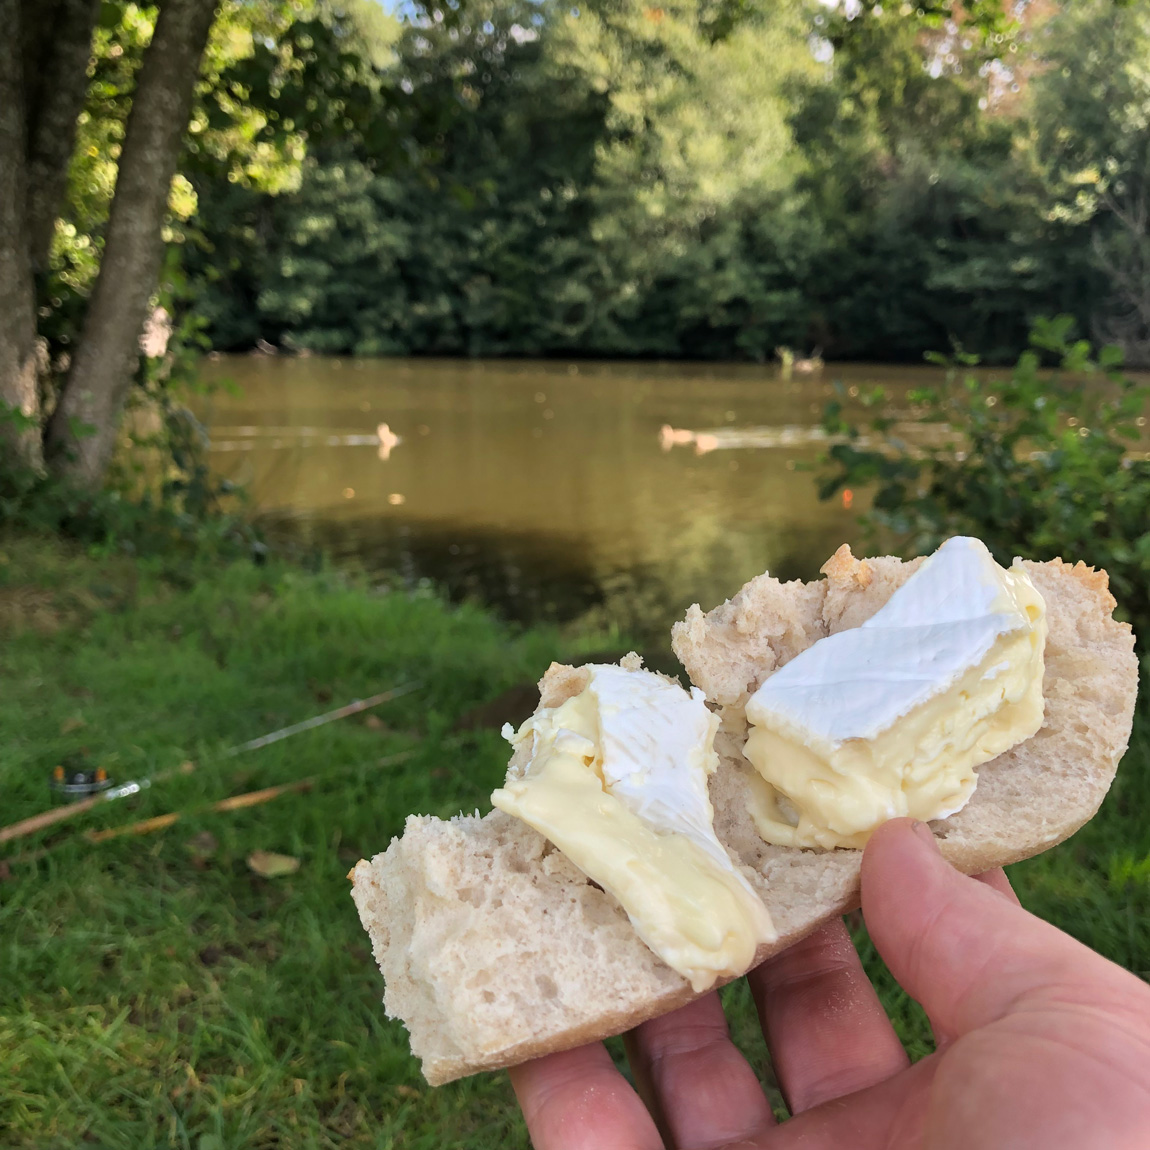 Lunch while fishing at Chiddingstone Castle.